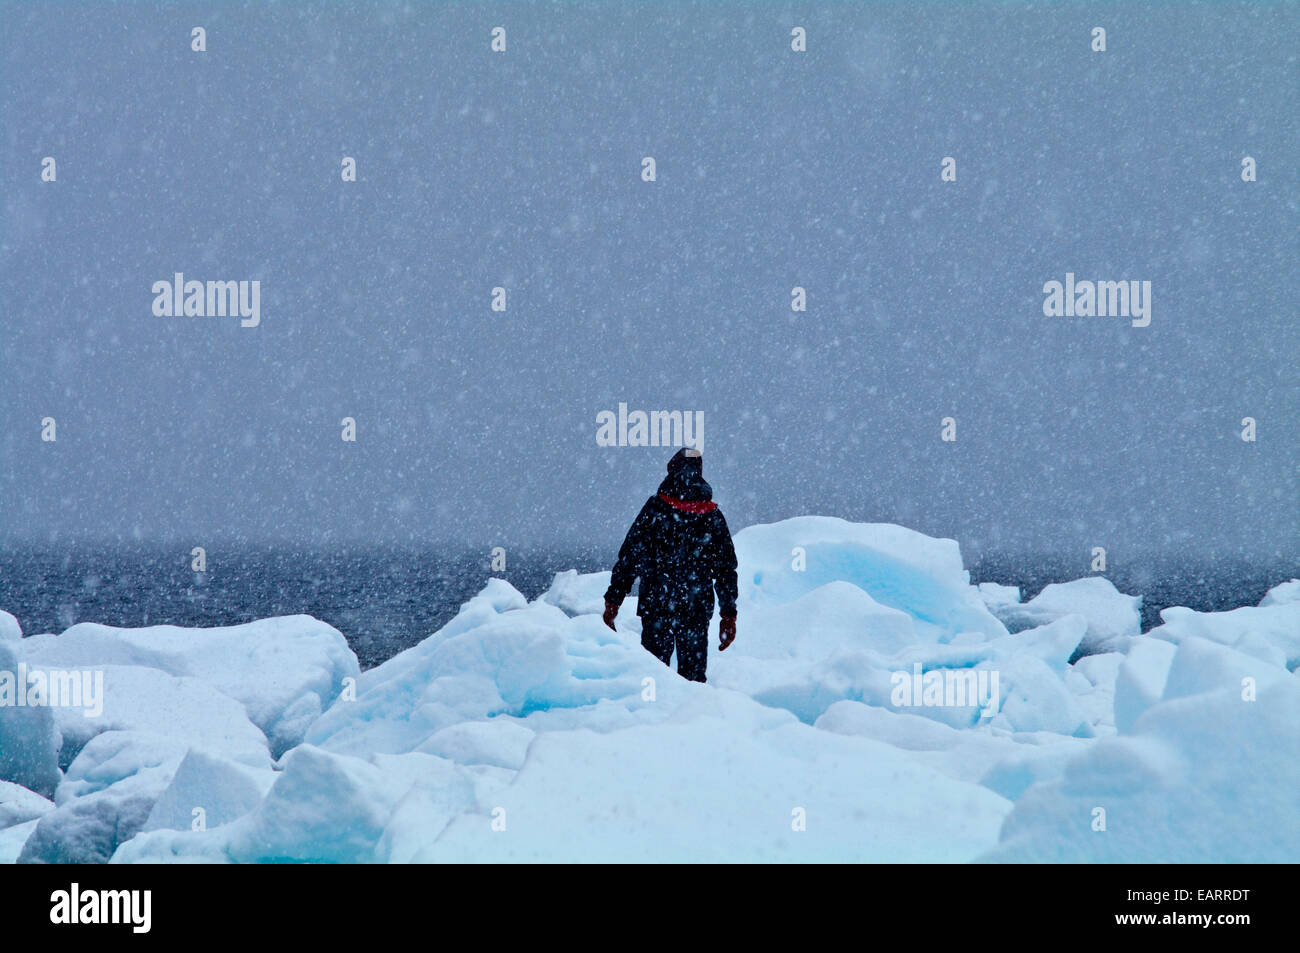 A man hikes in a blizzard on an island shoreline covered in icebergs. Stock Photo